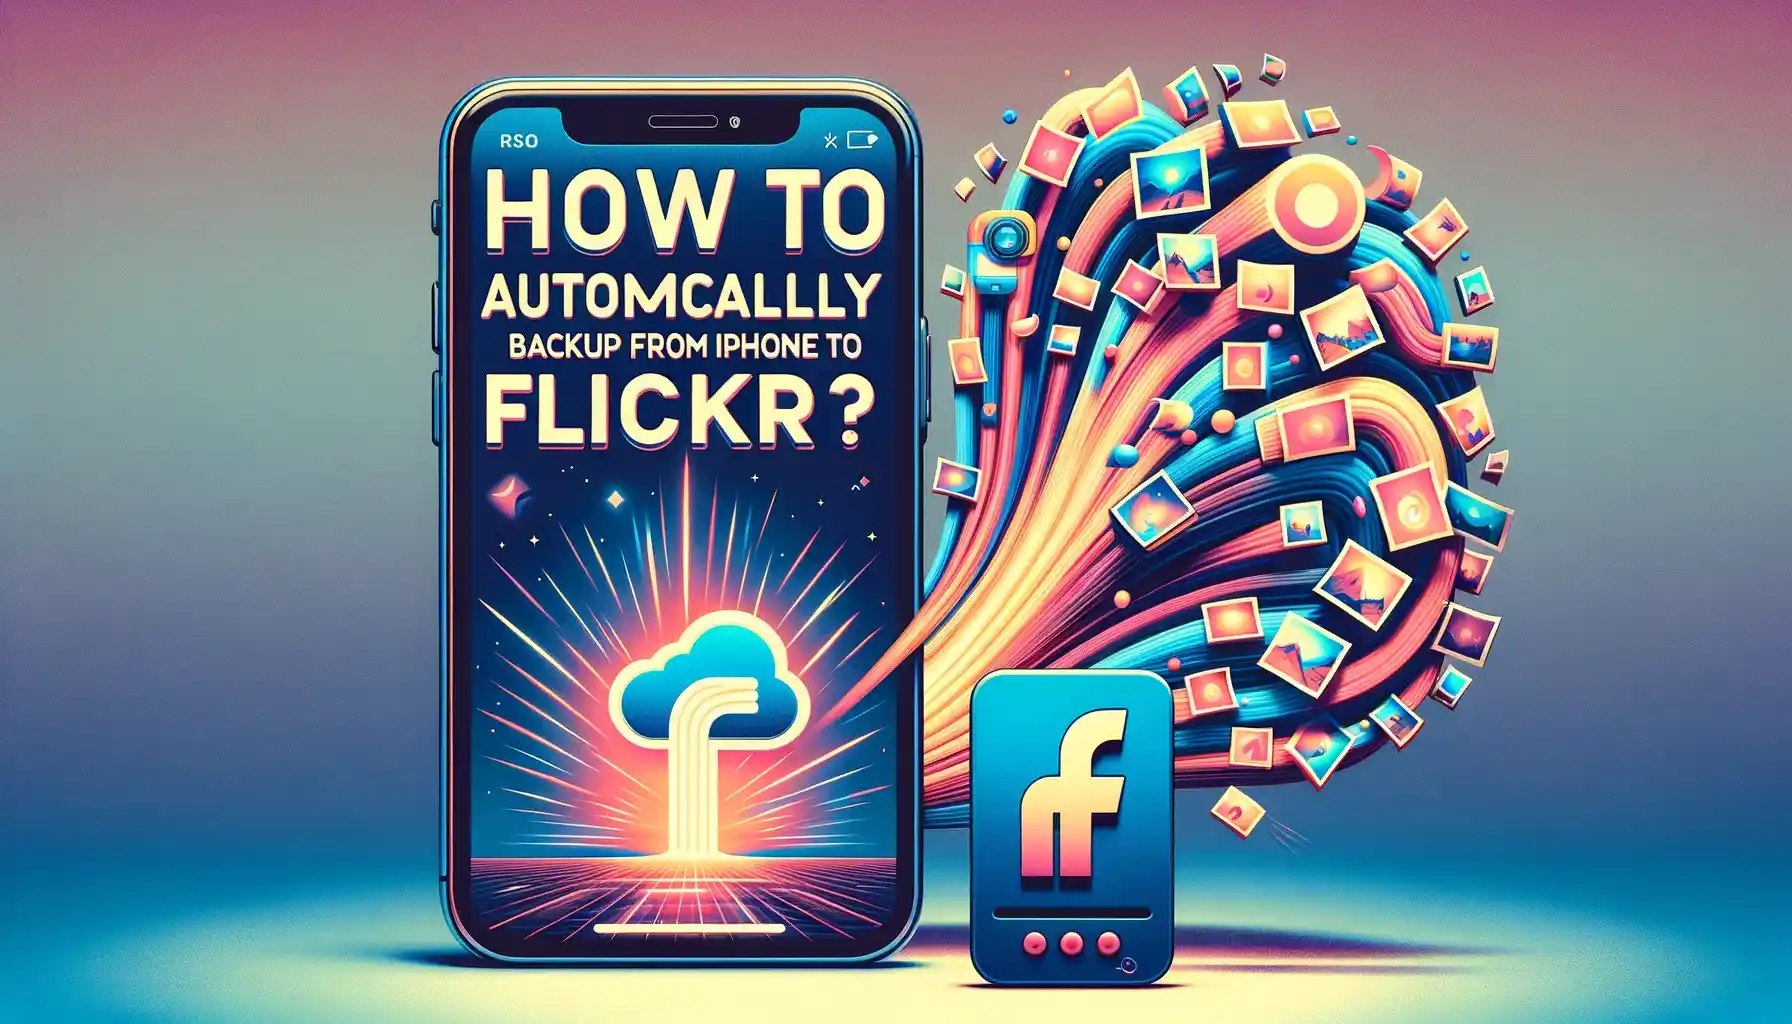 How to Automatically Backup Photos from iPhone to Flickr?